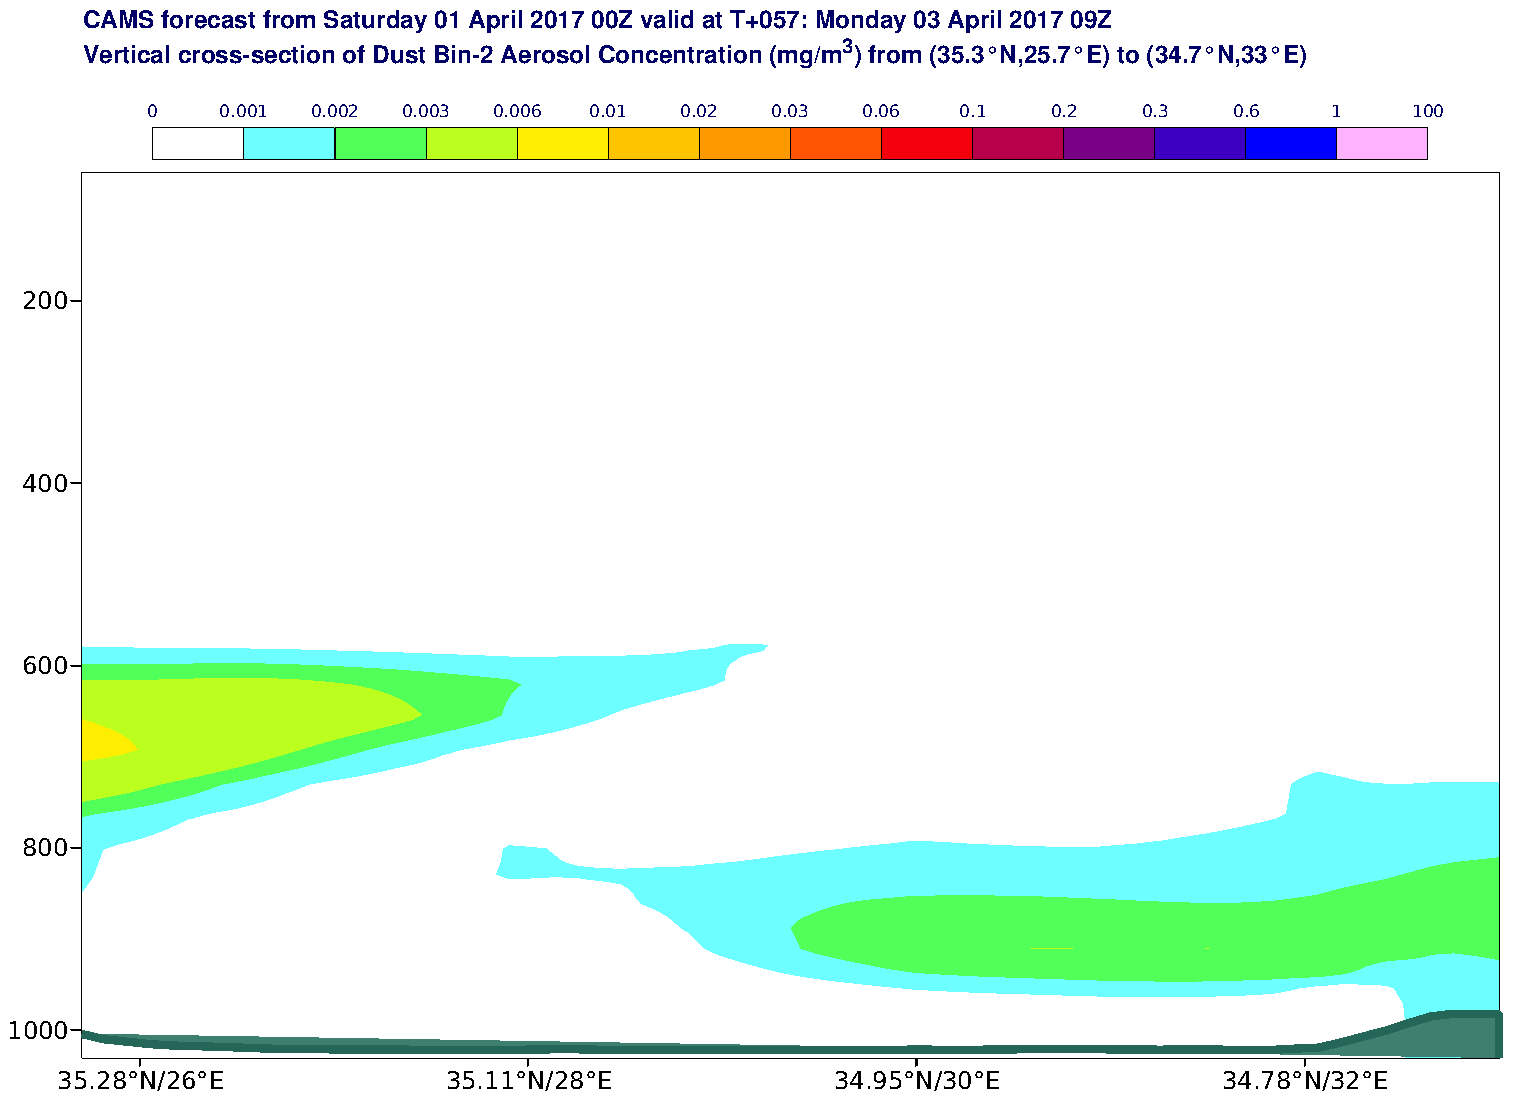 Vertical cross-section of Dust Bin-2 Aerosol Concentration (mg/m3) valid at T57 - 2017-04-03 09:00